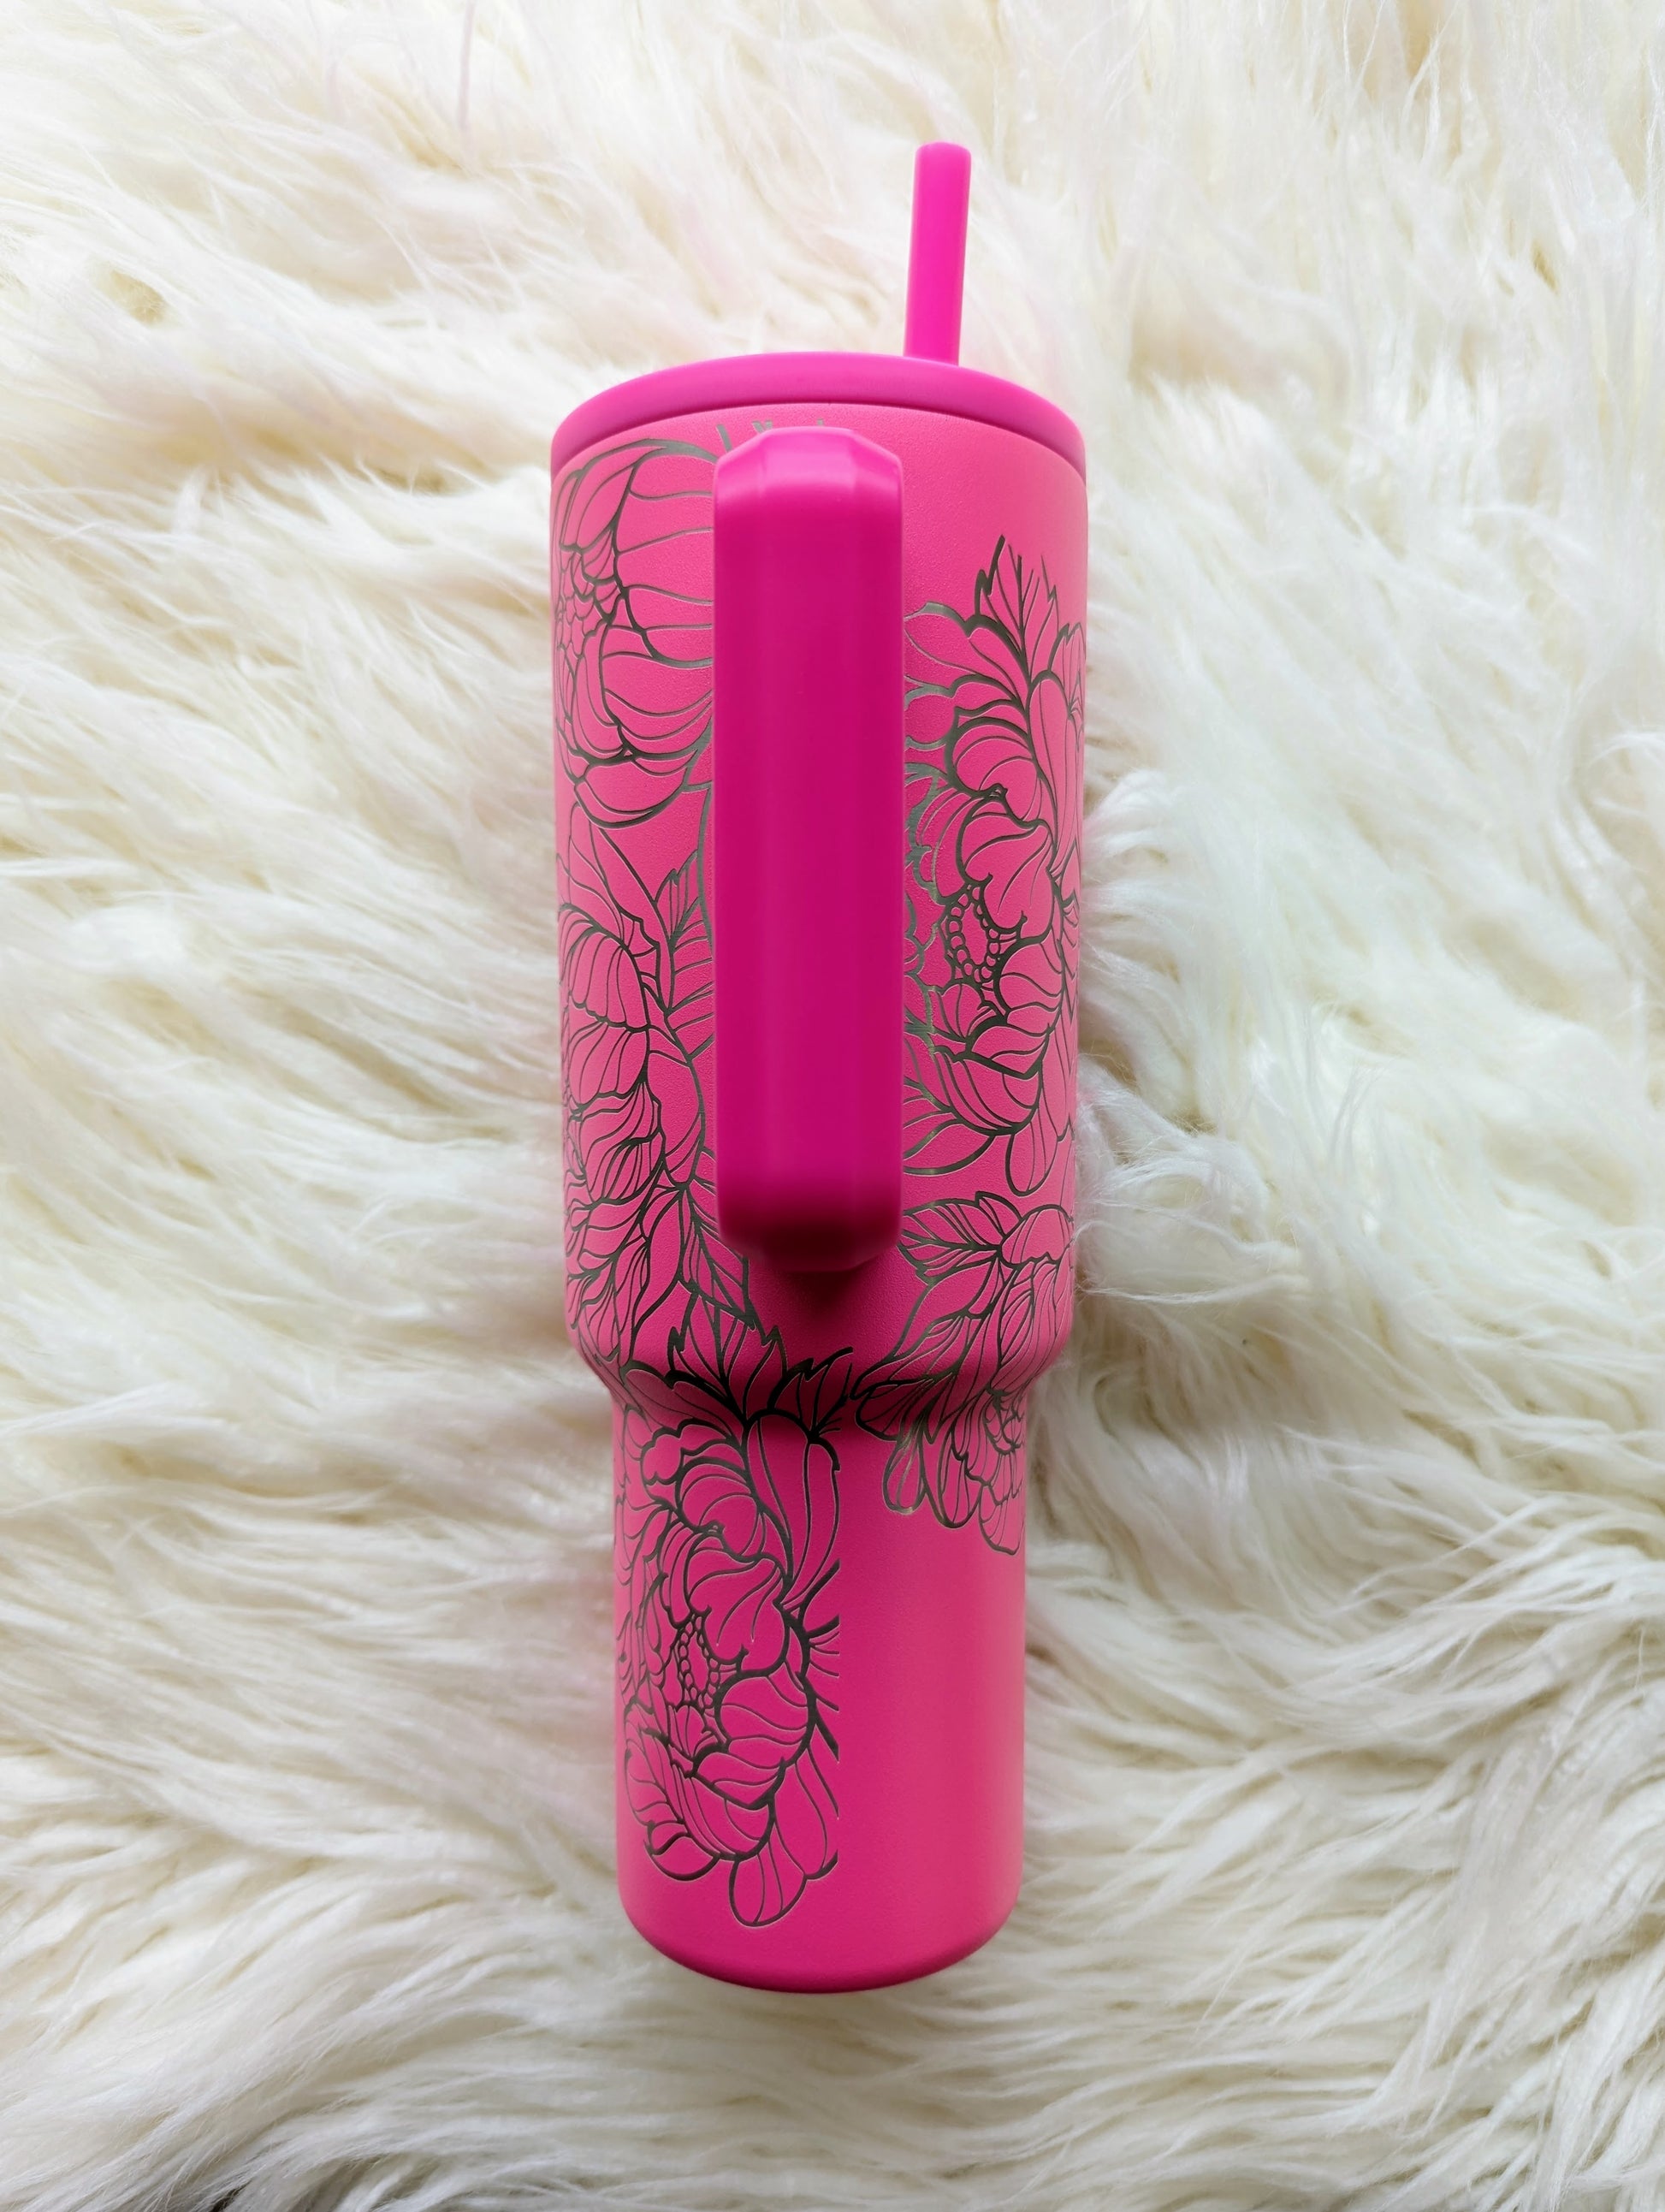 Peony floral pattern engraved on hot pink 40 oz insulated tumbler with handle by Simple Modern